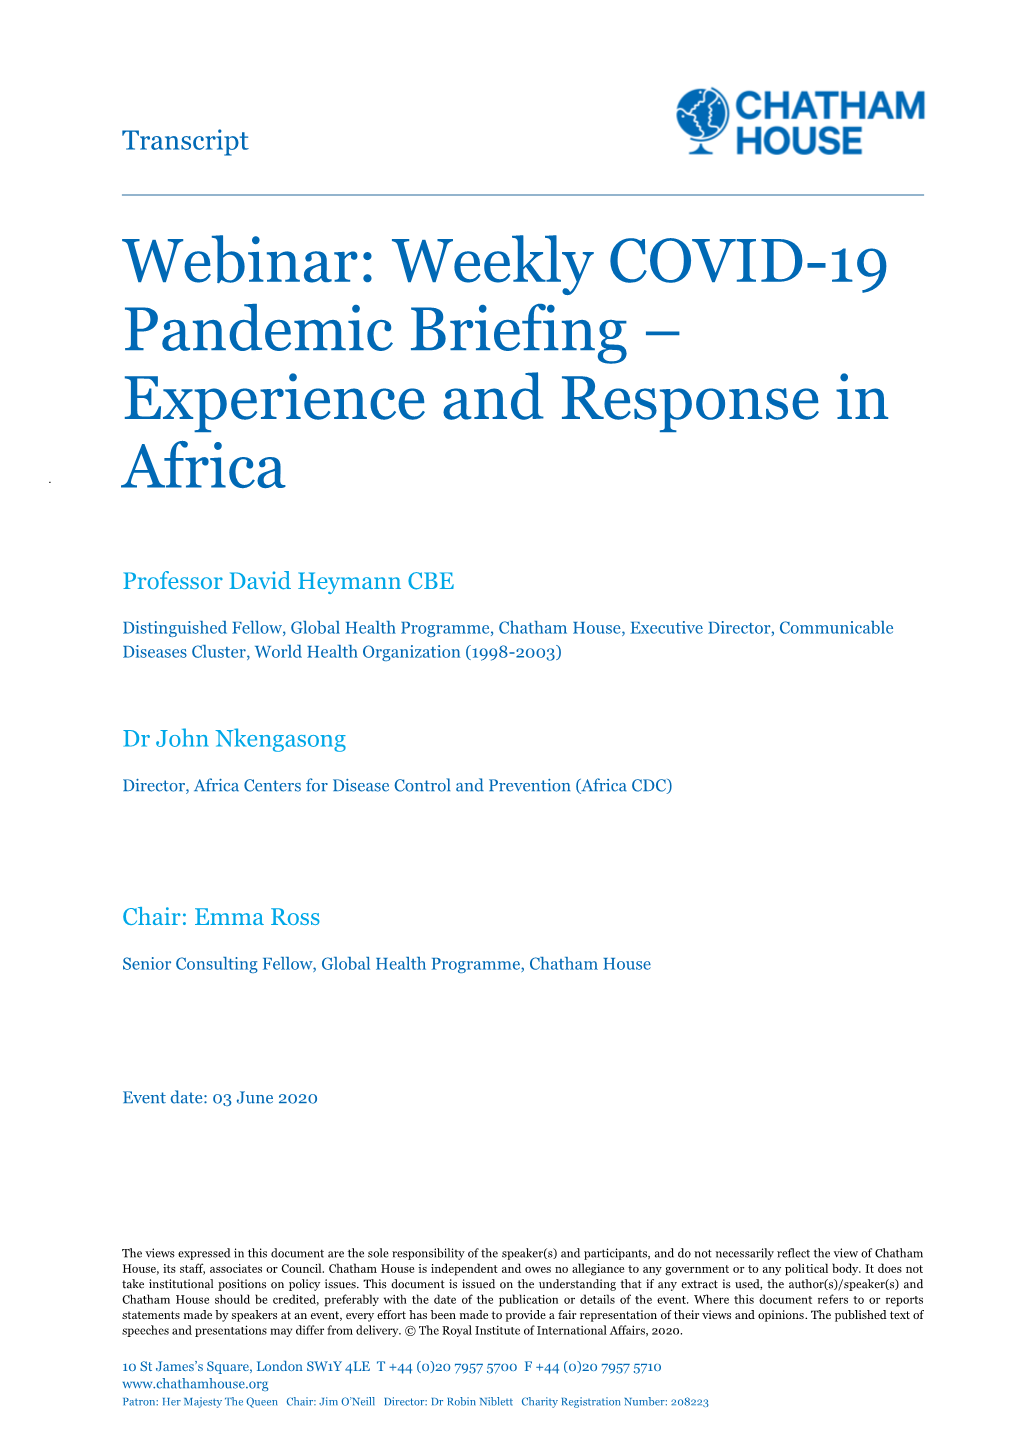 Weekly COVID-19 Pandemic Briefing – Experience and Response in Africa